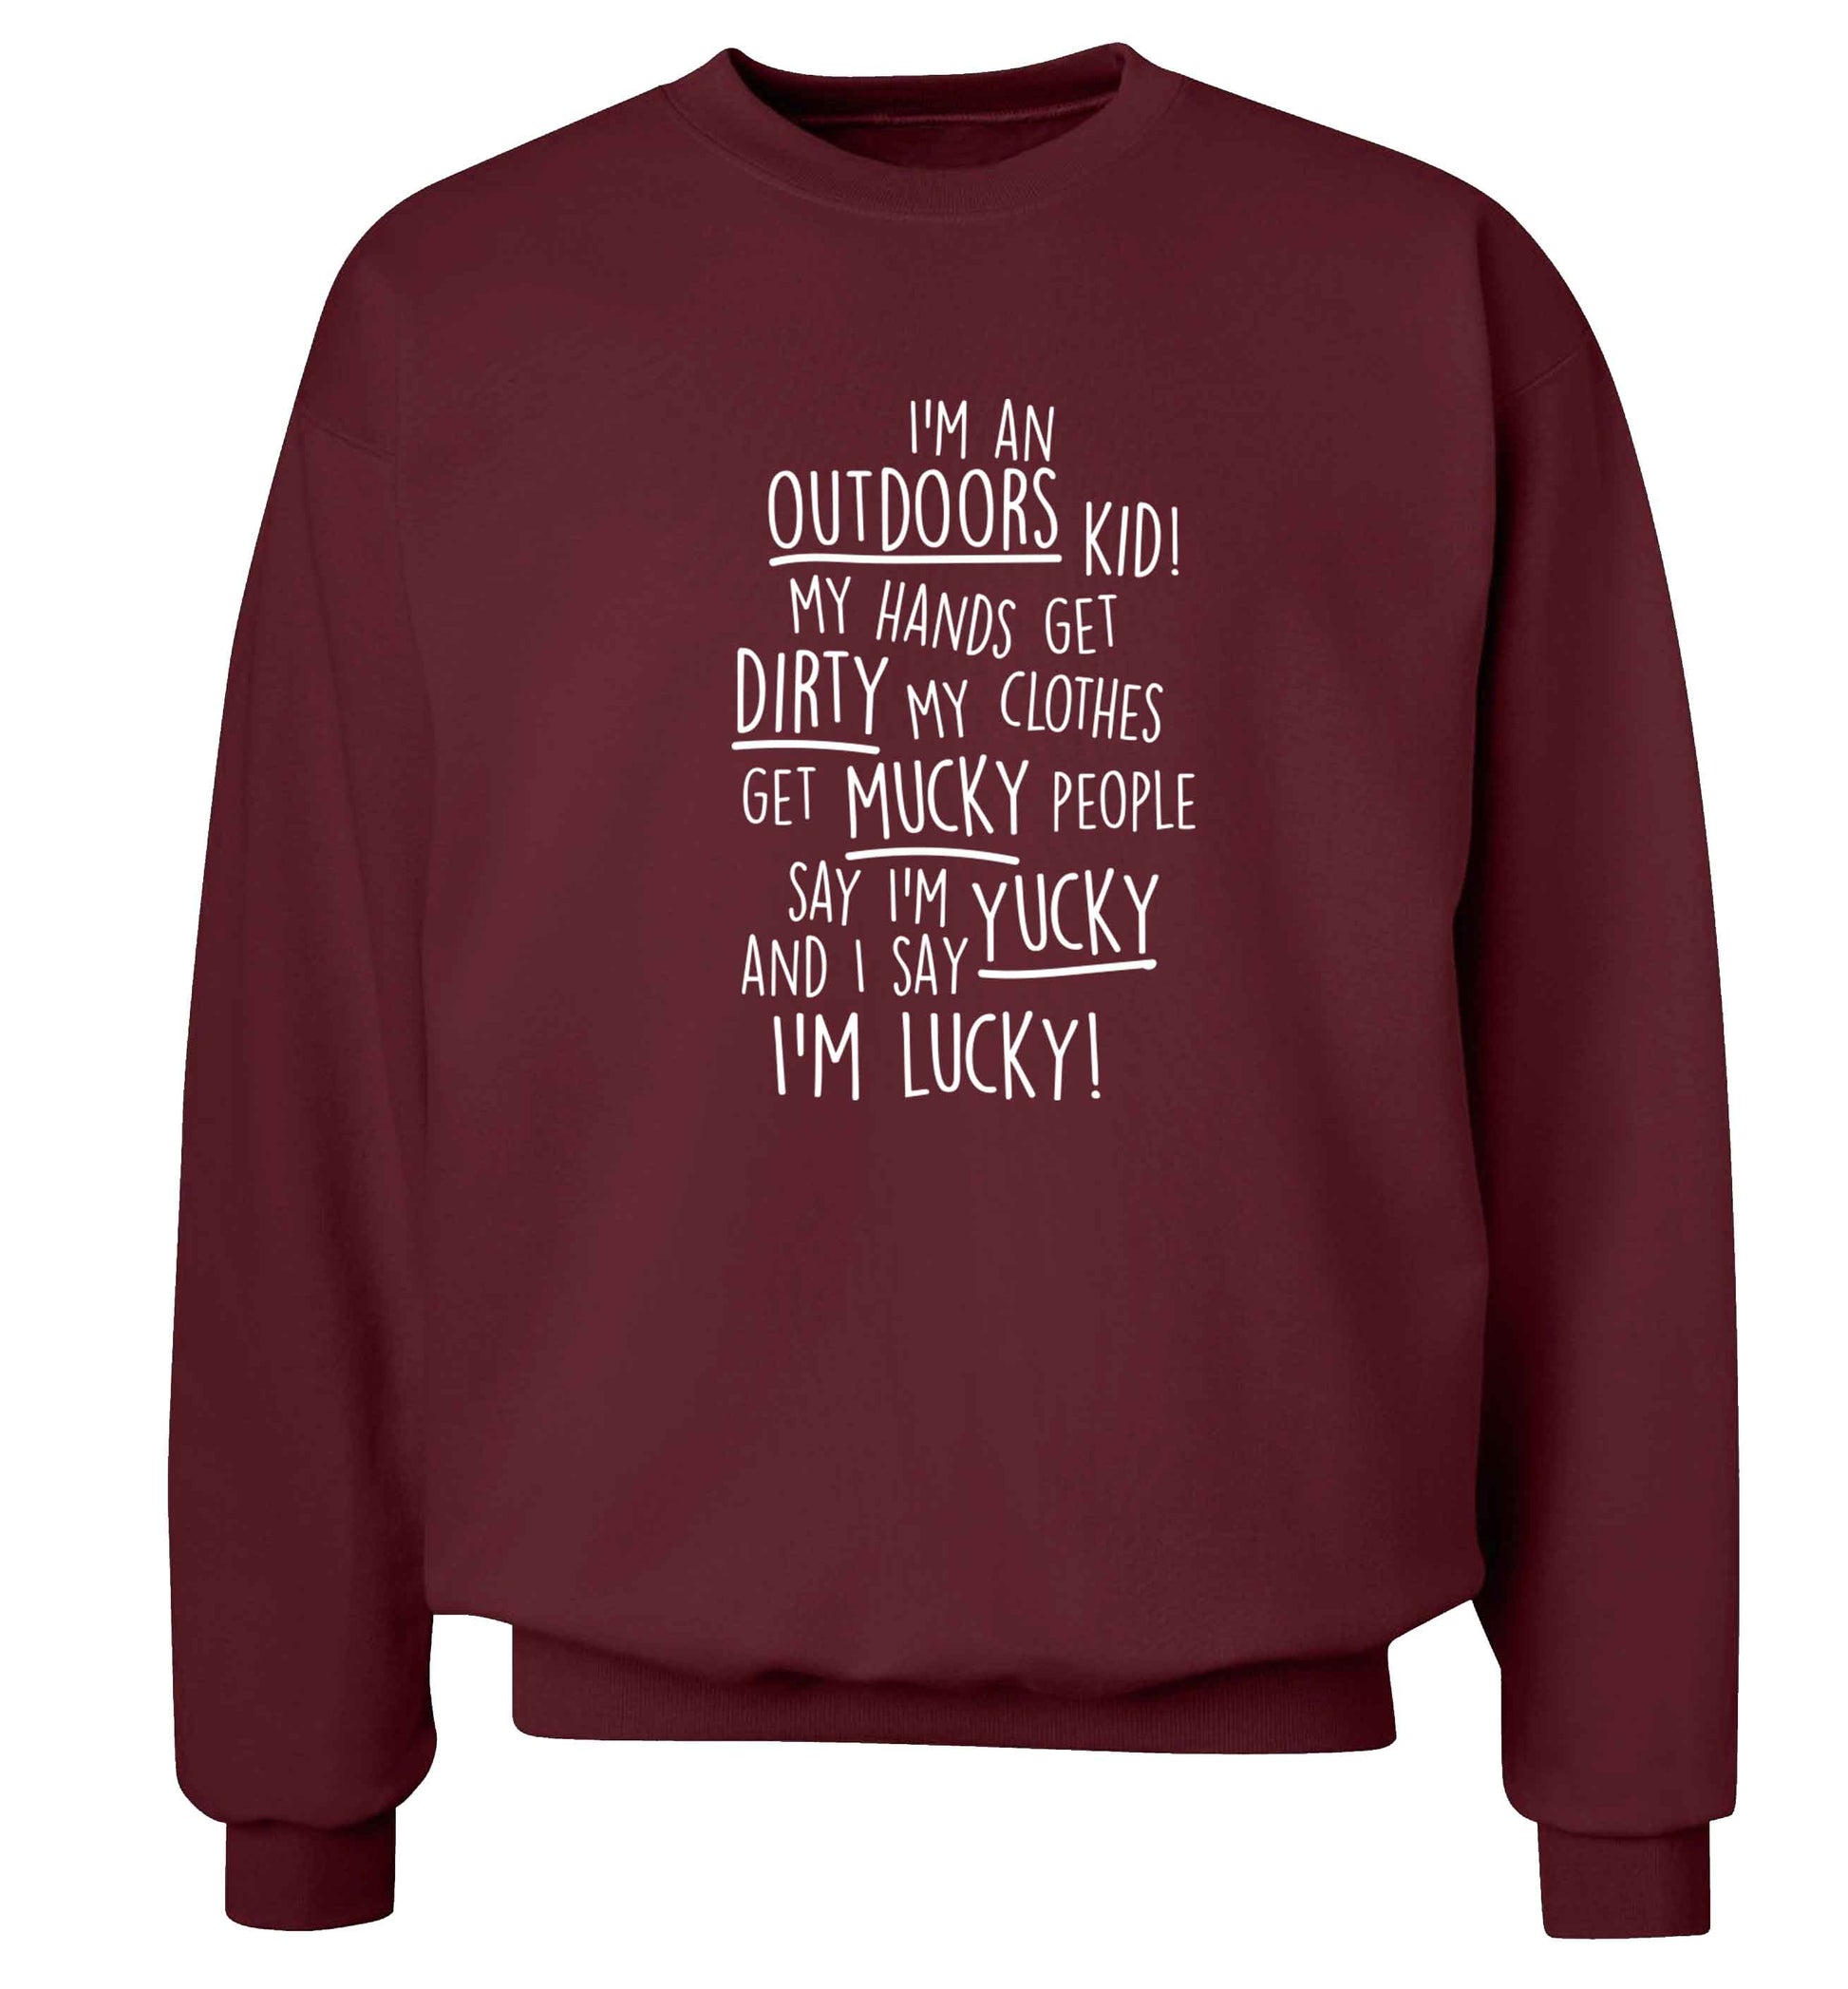 I'm an outdoors kid poem Adult's unisex maroon Sweater 2XL